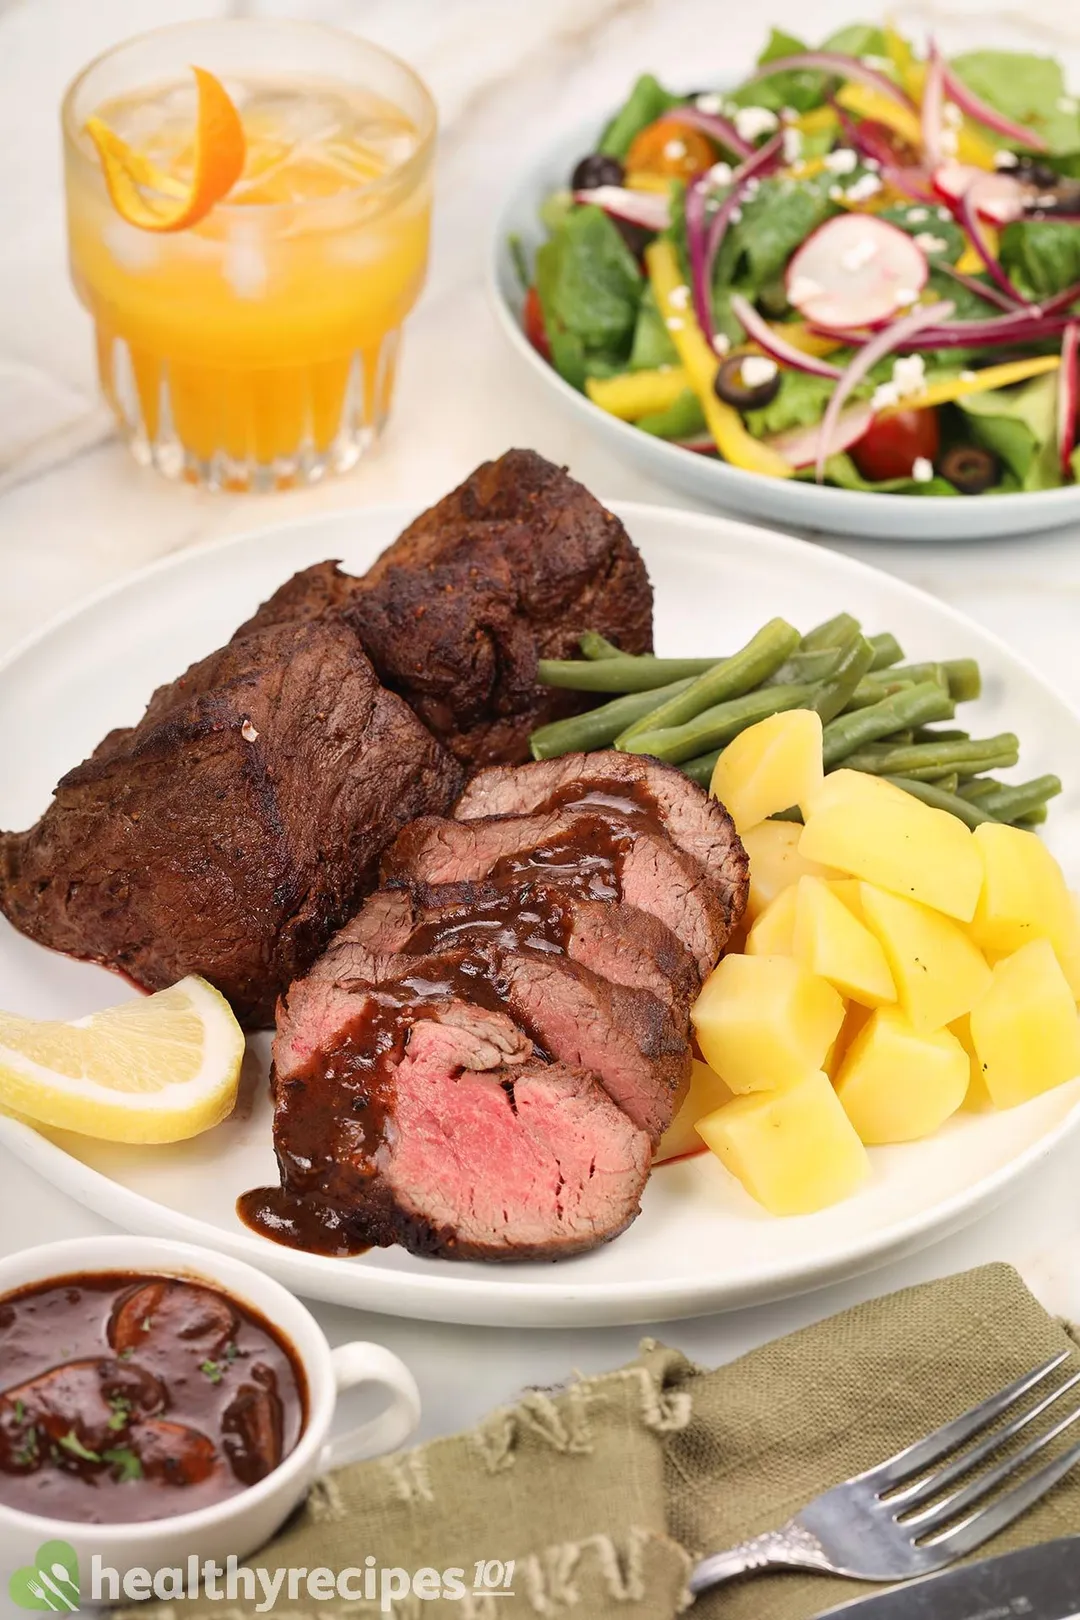 a plate of roasted beef tender loin with potato cubed, green beans decorated with a plate of salad and a glass of orange juice